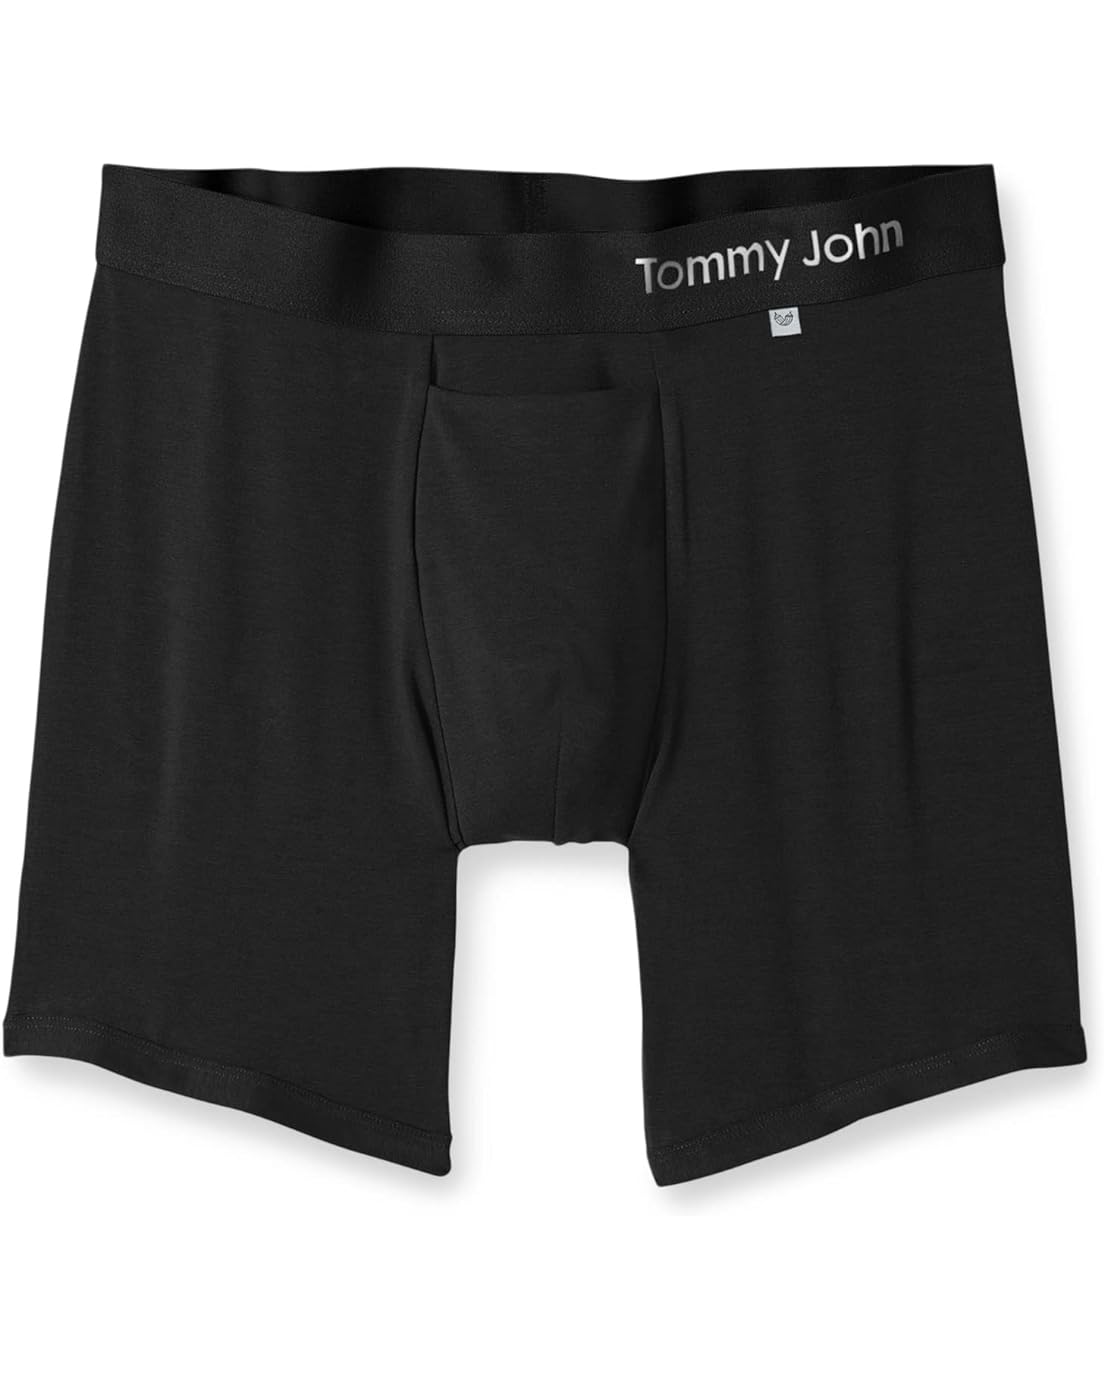 Tommy John Cool Cotton Hammock Pouch Mid-Length Boxer Brief 6